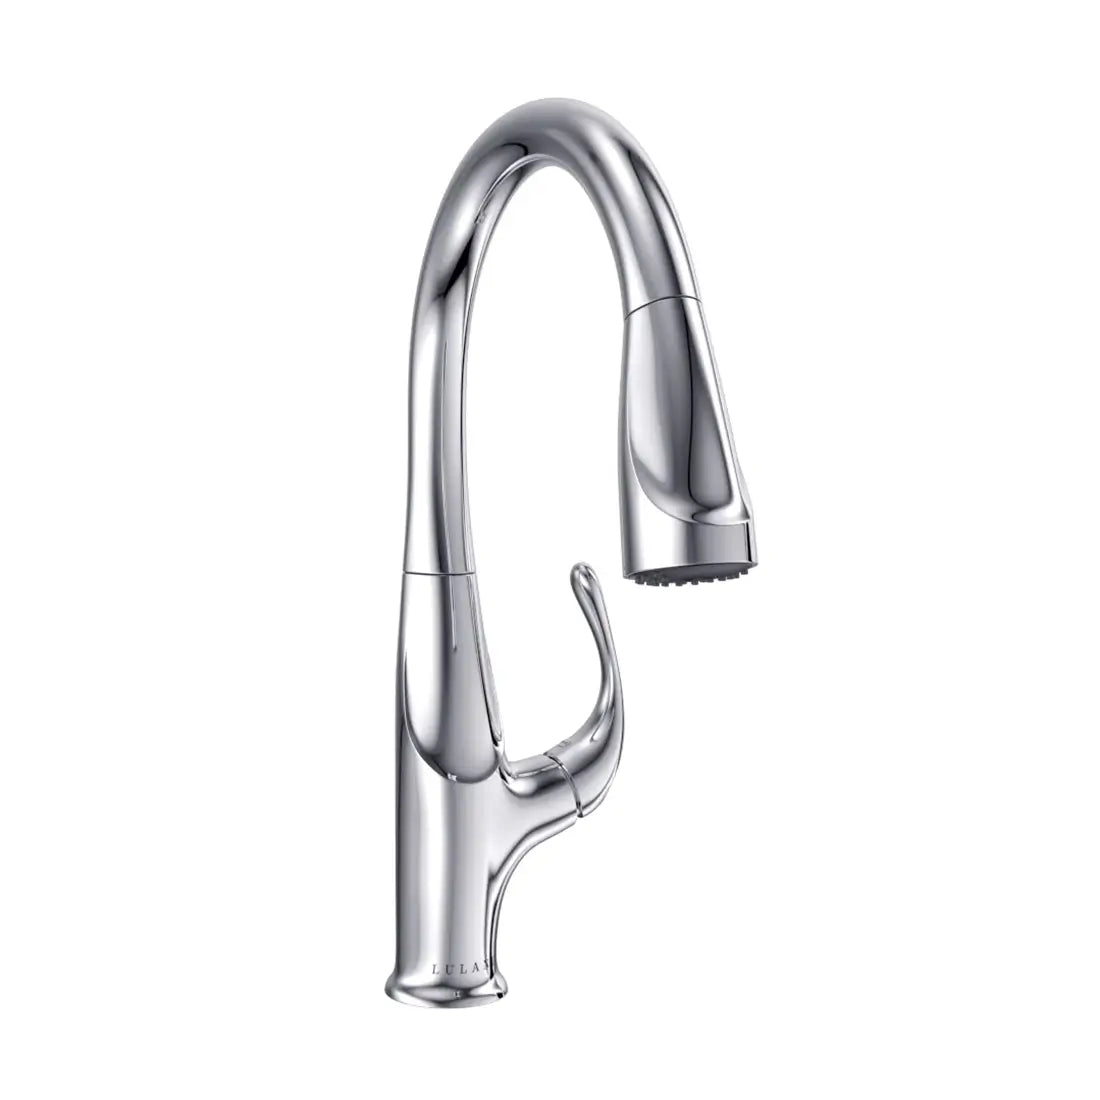 Collection of Kitchen Faucets